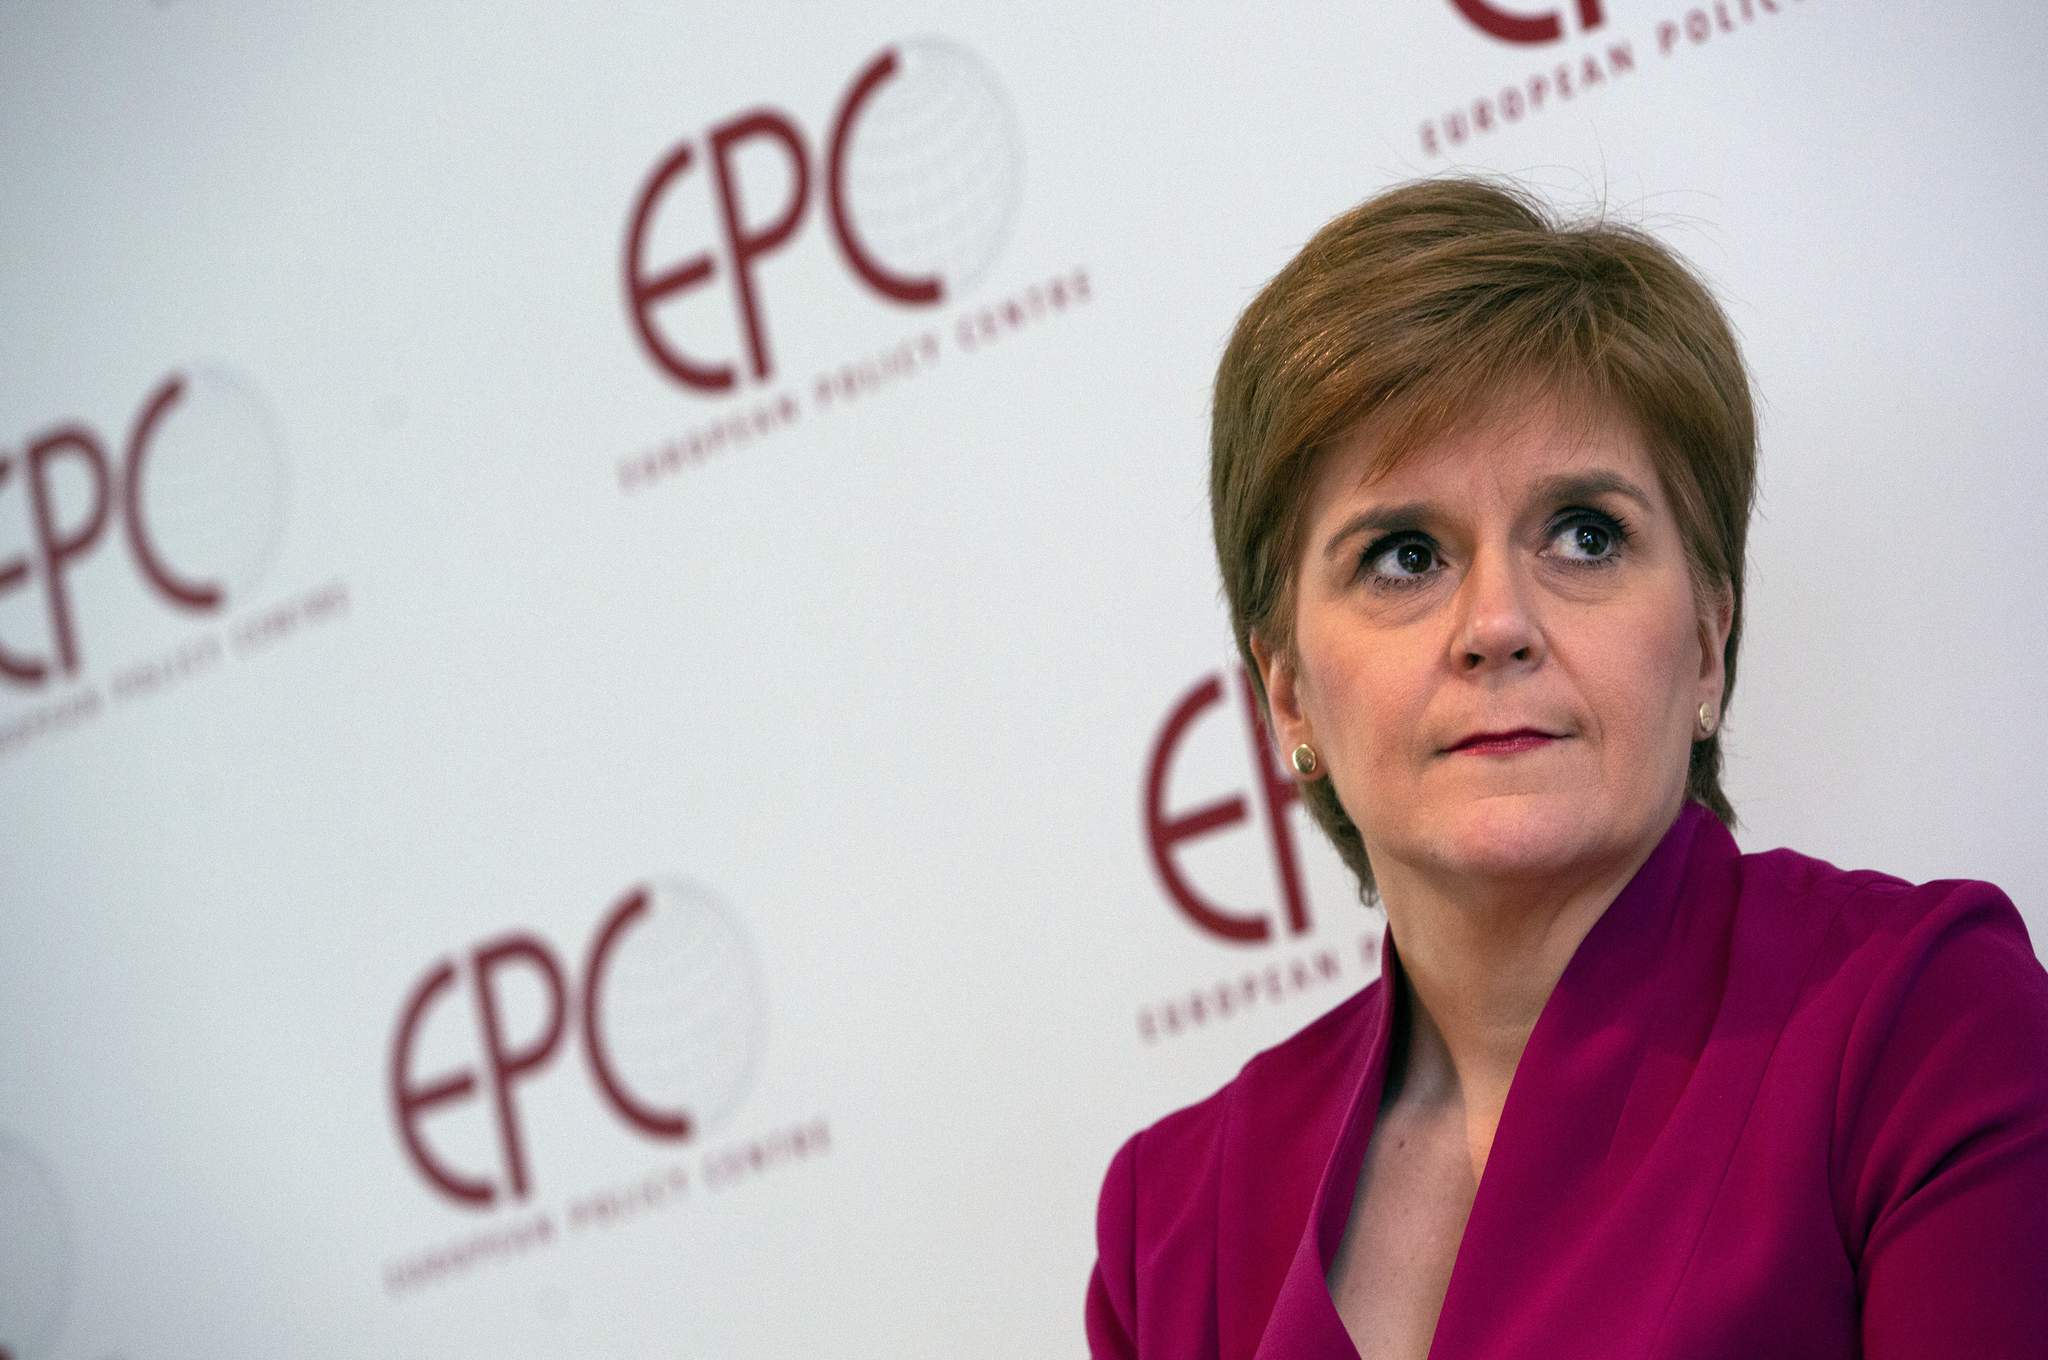 Lawyer clears Scotland's leader of misleading lawmakers